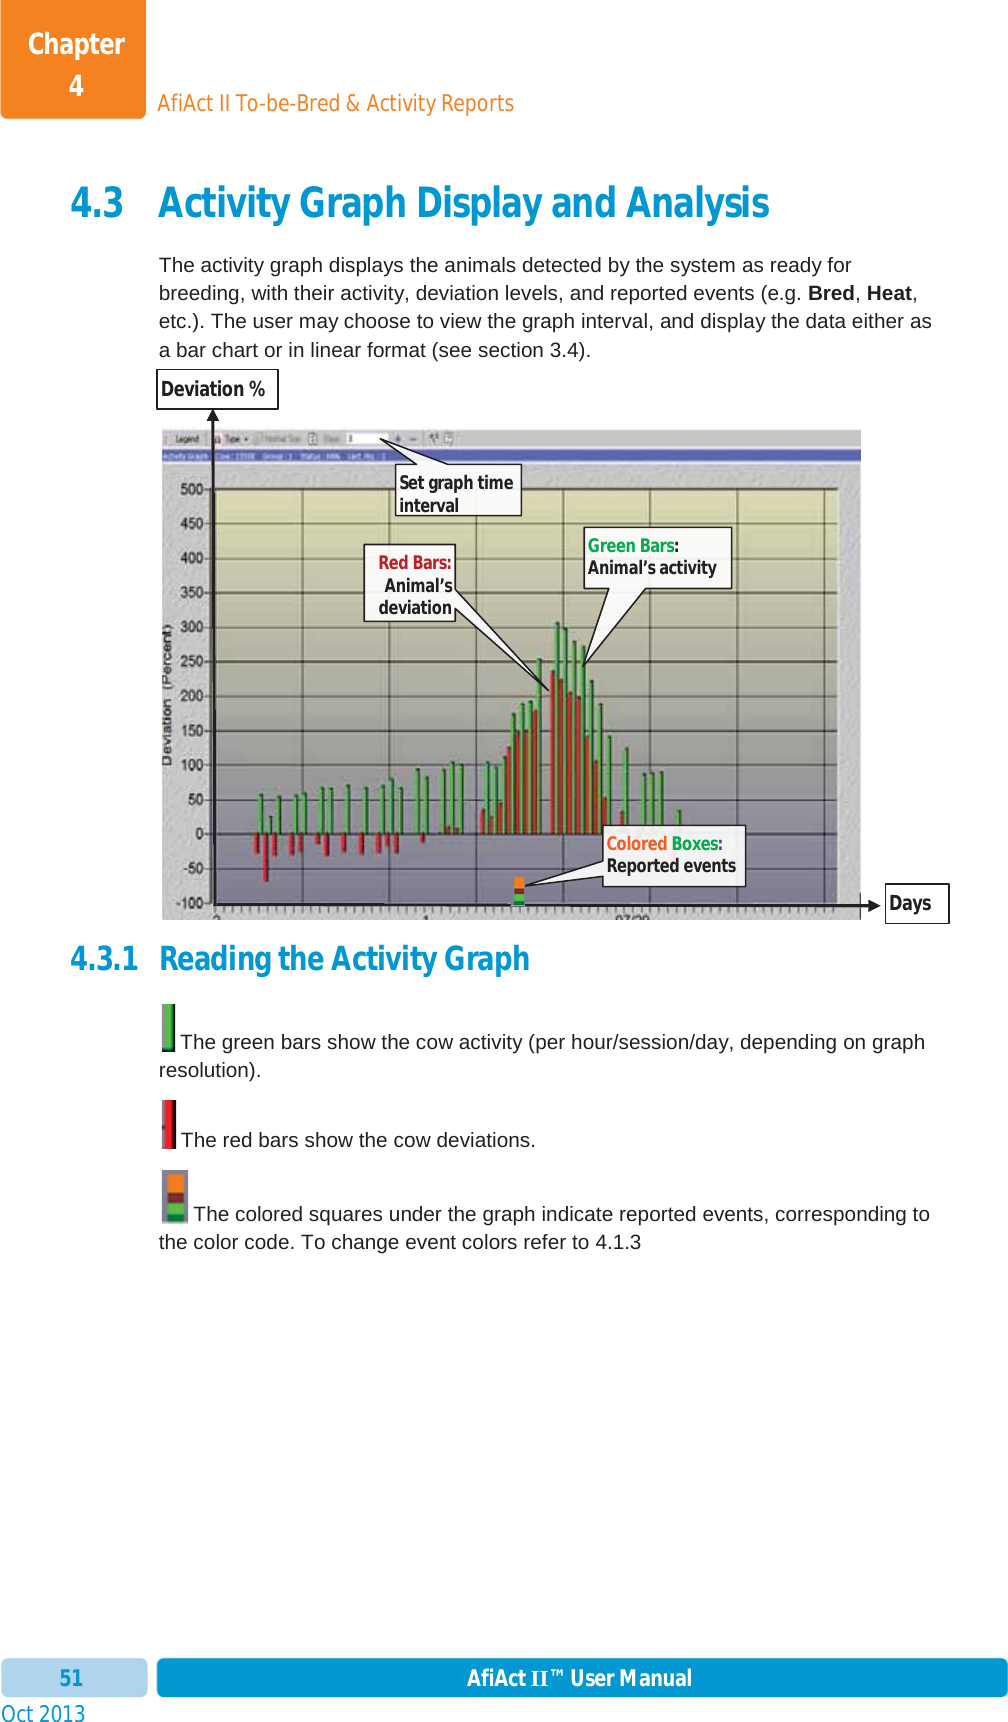 Oct 2013 AfiAct II™ User Manual51AfiAct II To-be-Bred &amp; Activity ReportsChapter 44.3 Activity Graph Display and Analysis The activity graph displays the animals detected by the system as ready for breeding, with their activity, deviation levels, and reported events (e.g. Bred,Heat,etc.). The user may choose to view the graph interval, and display the data either as a bar chart or in linear format (see section  3.4).  4.3.1 Reading the Activity Graph  The green bars show the cow activity (per hour/session/day, depending on graph resolution).  The red bars show the cow deviations.  The colored squares under the graph indicate reported events, corresponding to the color code. To change event colors refer to 4.1.3Green Bars:Animal’s activity  Days Colored Boxes:Reported events Red Bars:Animal’s deviation Deviation % Set graph time interval  